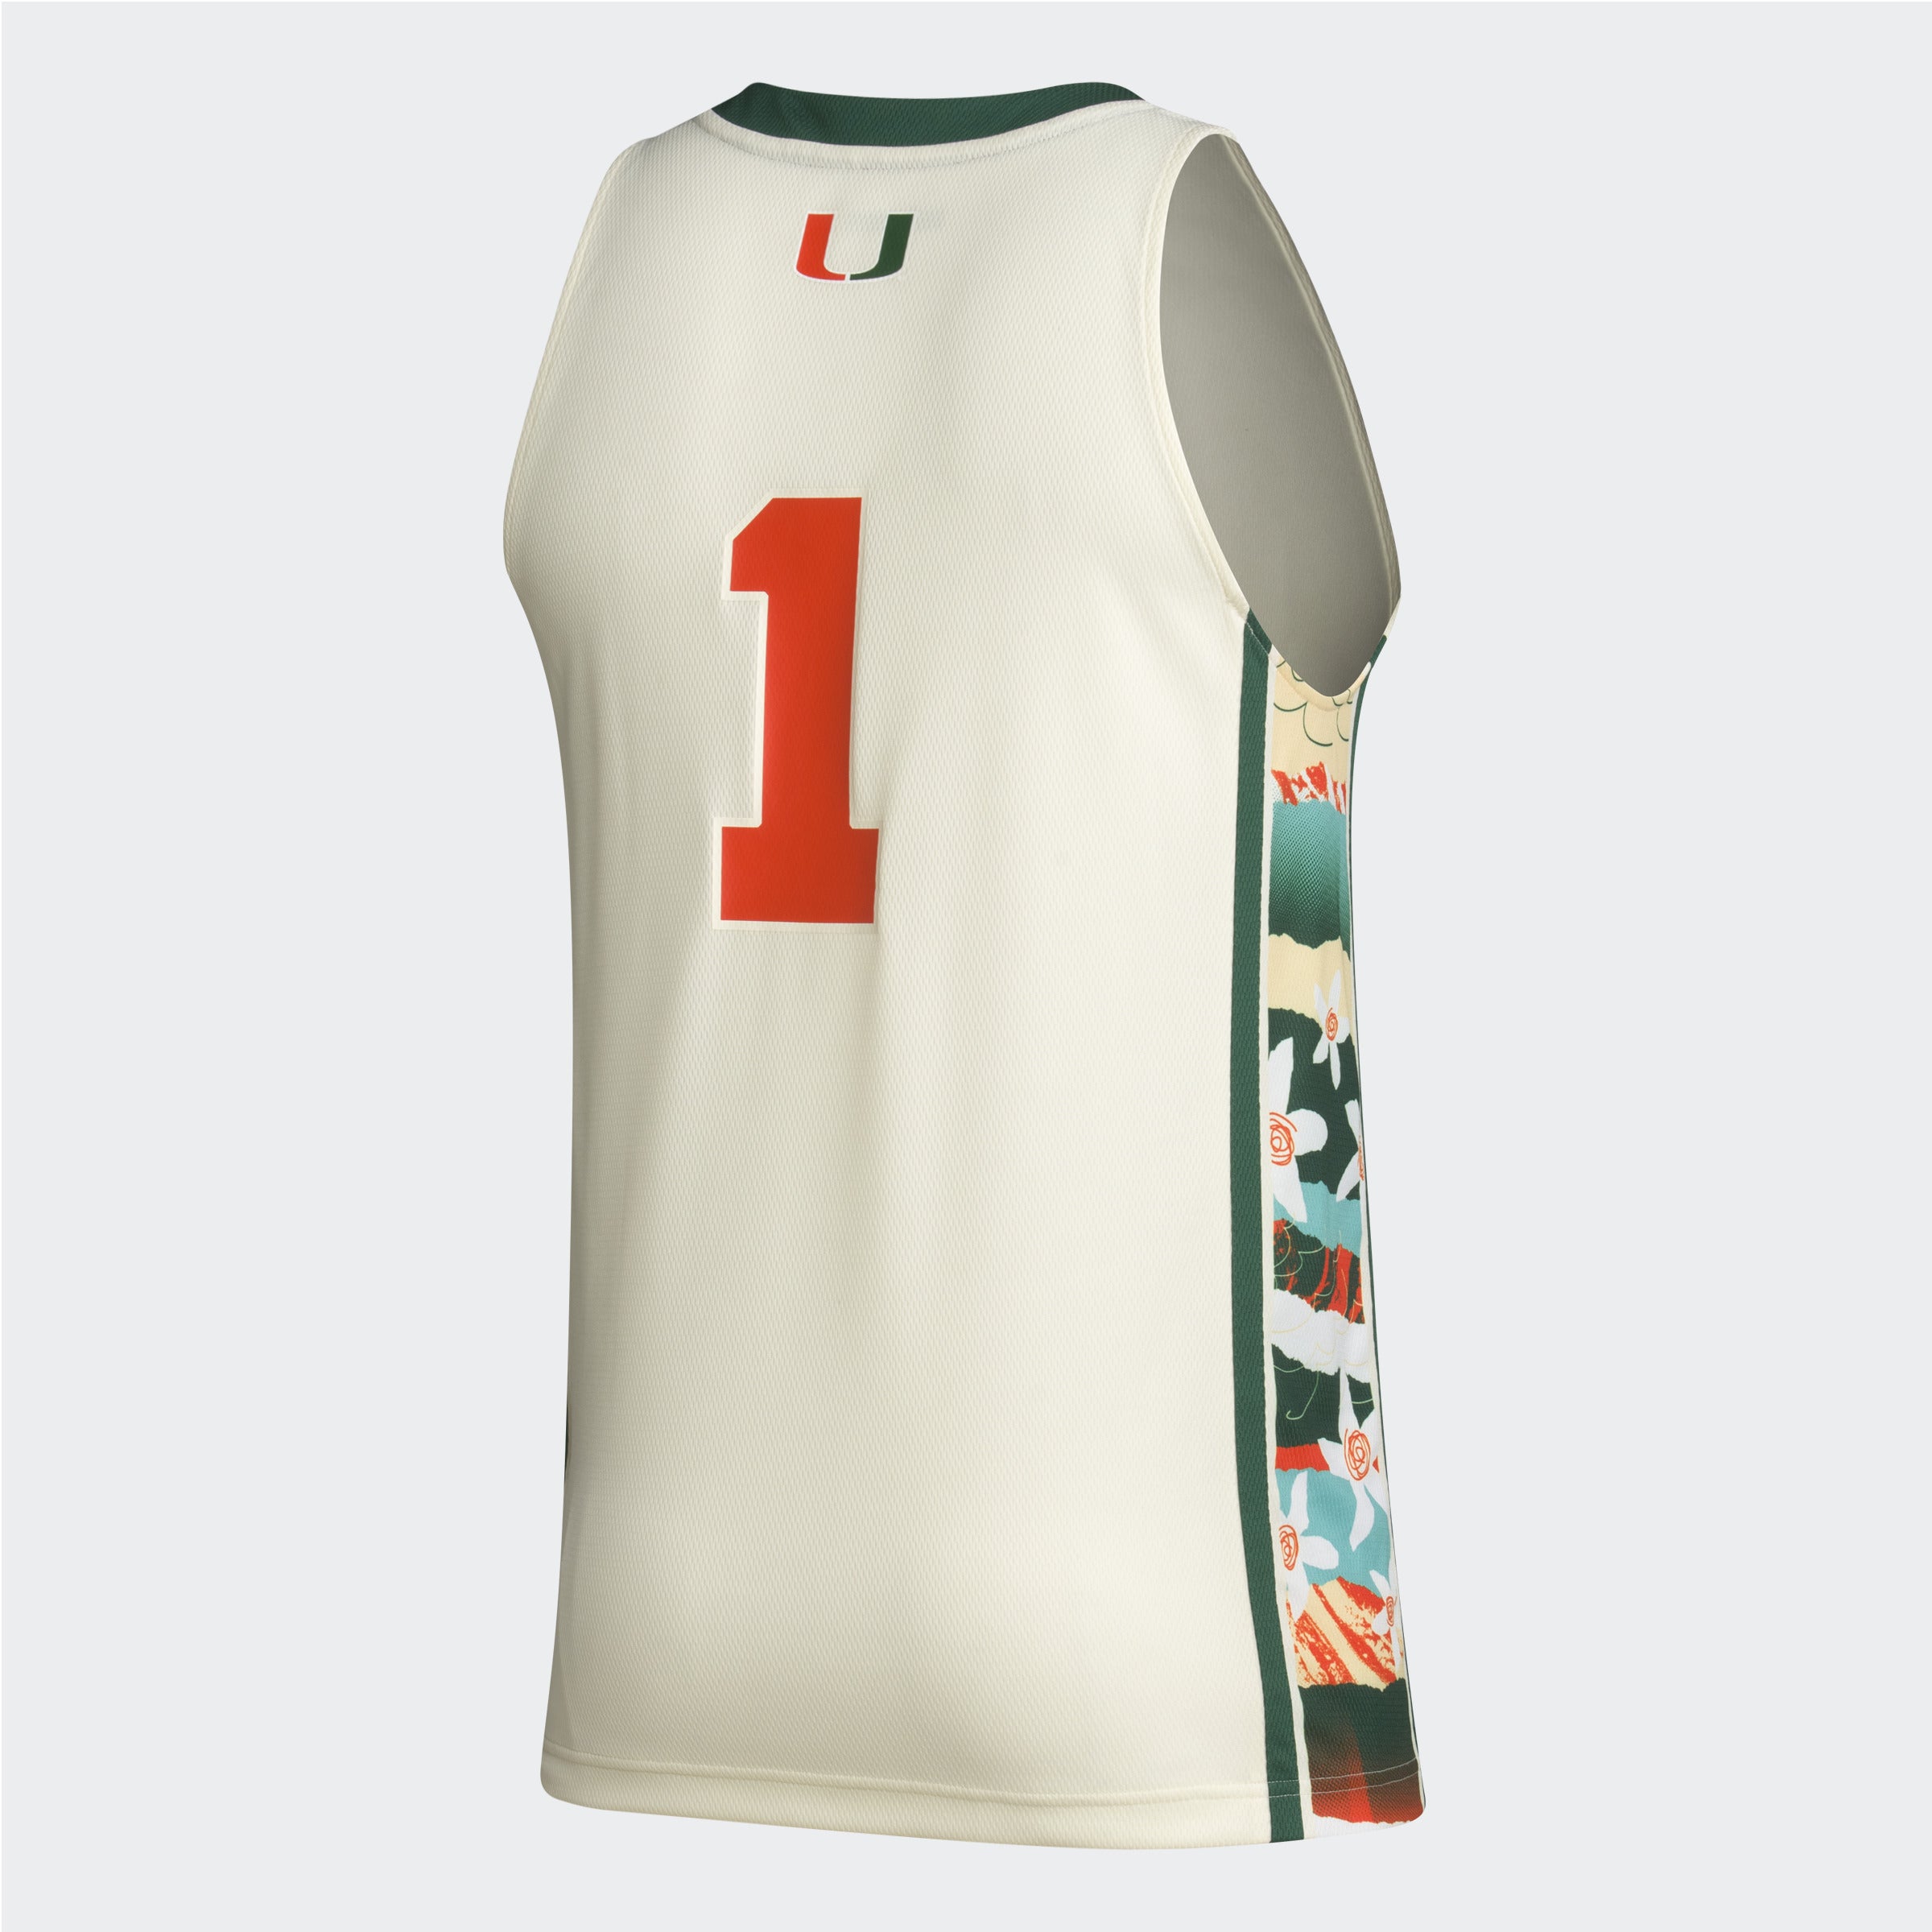 Men's adidas Green Miami Hurricanes 2017 March Madness Basketball Jersey